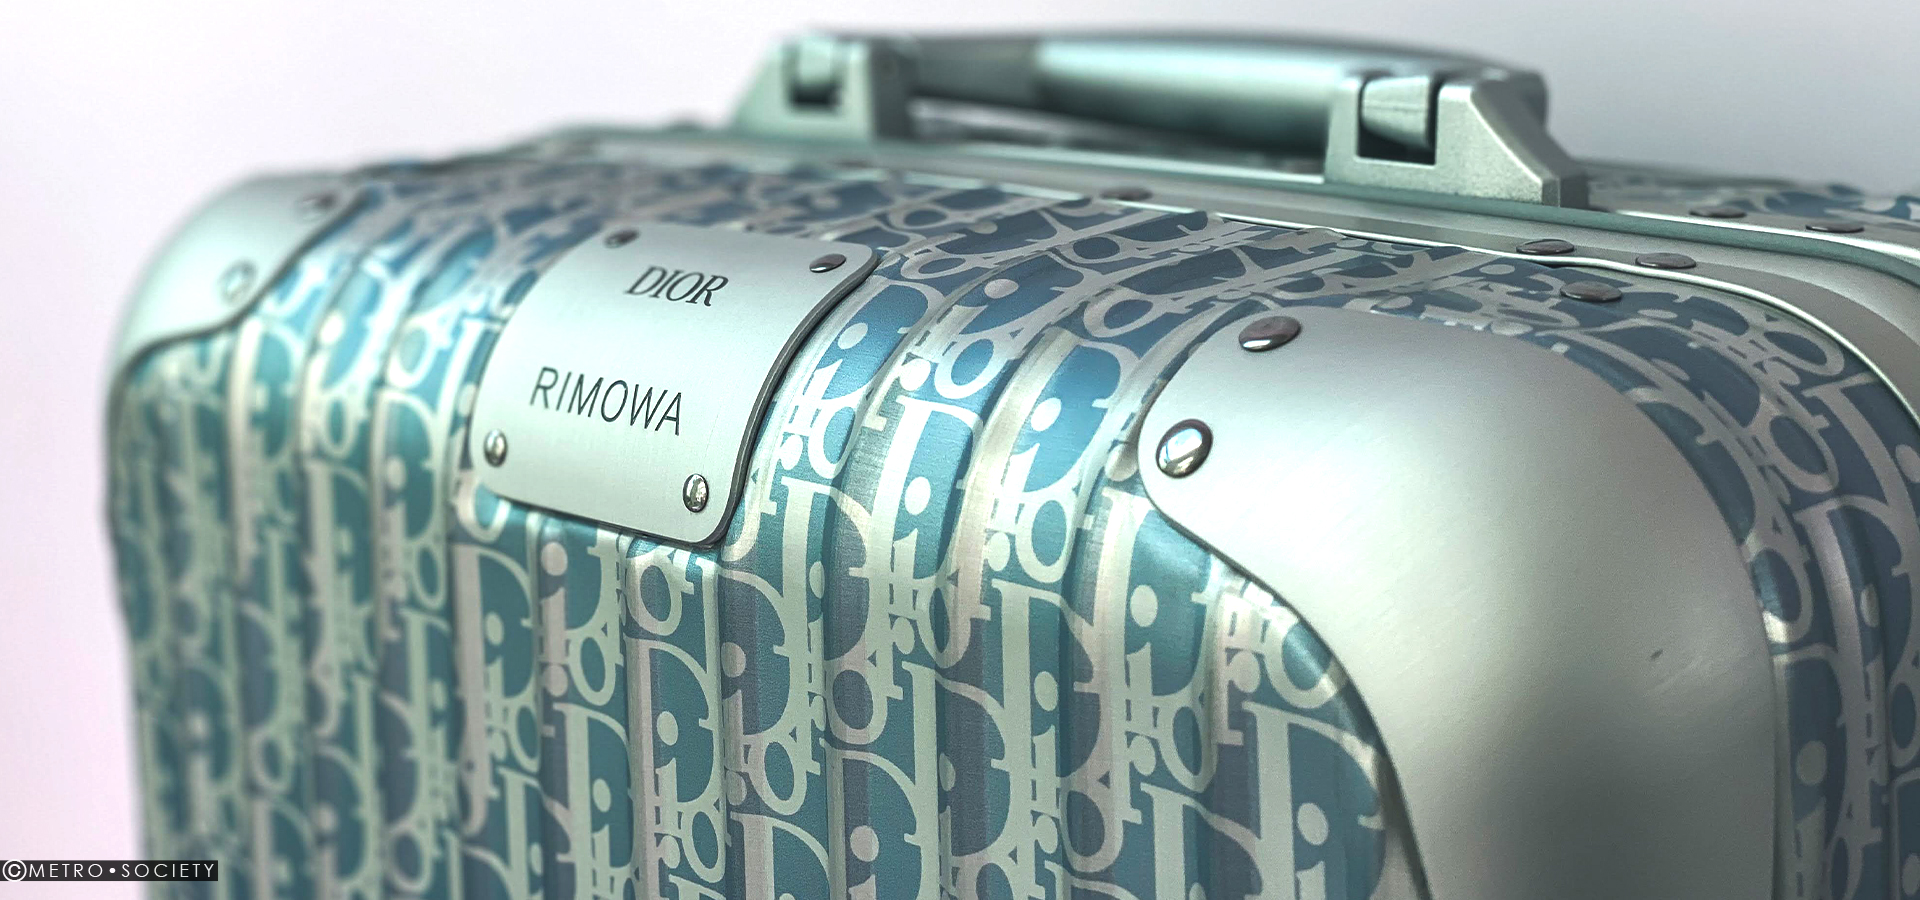 Dior X Rimowa: See The Rest Of This Special Collaboration